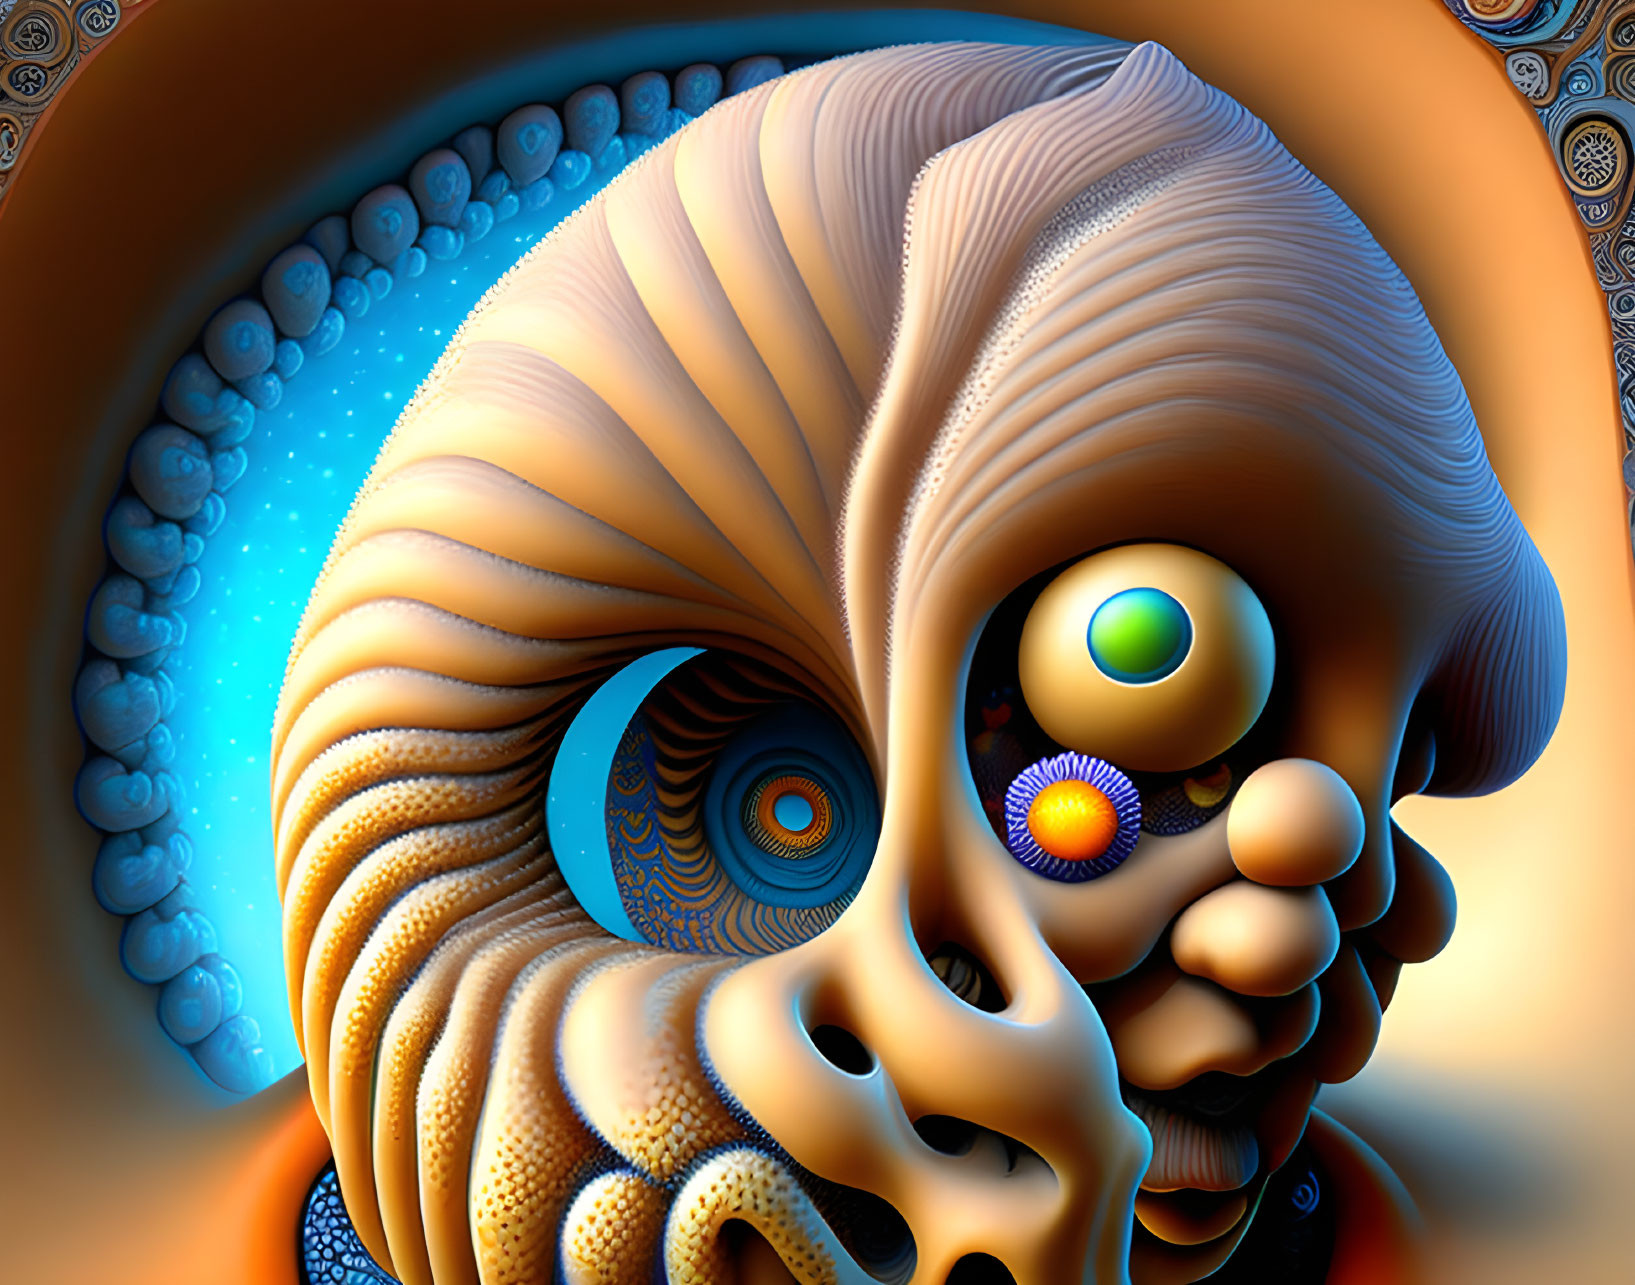 Surreal digital artwork: face with fractal textures and vibrant colors